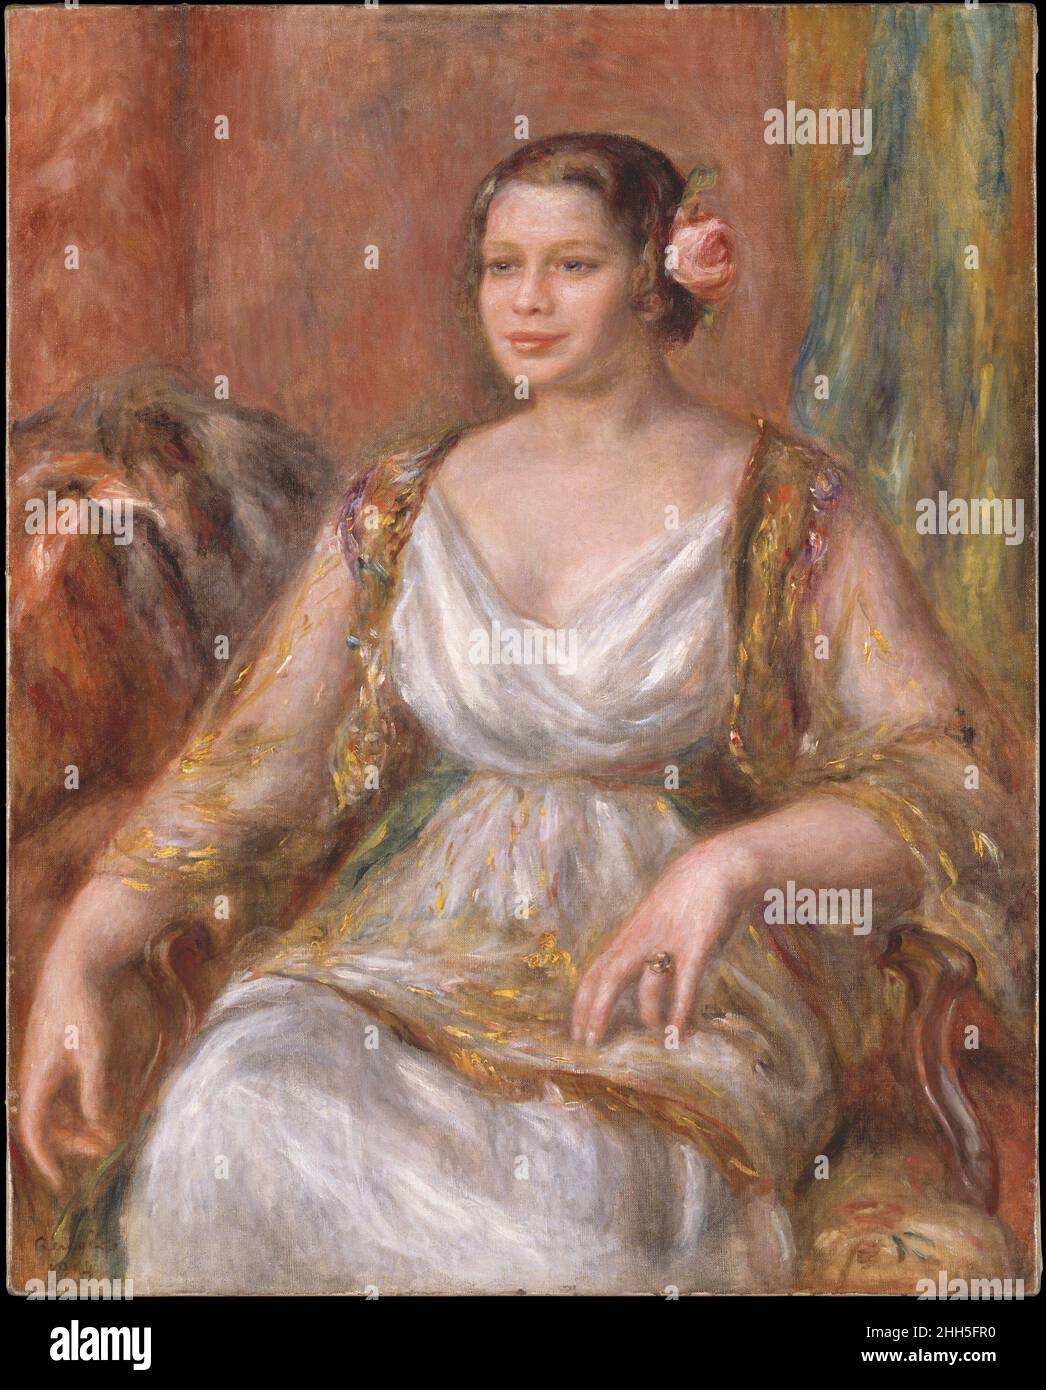 Tilla Durieux (Ottilie Godeffroy, 1880–1971) 1914 Auguste Renoir French In July 1914, just prior to the outbreak of World War I, the famous German actress Tilla Durieux traveled to Paris with her husband, the art dealer Paul Cassirer, to pose for Renoir. The classicizing, pyramidal format of this composition lends a certain grandeur to the sitter, attired in the costume that the couturier Poiret designed for her role as Eliza Doolittle in George Bernard Shaw’s Pygmalion in 1913. When Renoir painted this ambitious portrait, he was so crippled with arthritis that he had to sit in a wheelchair wi Stock Photo